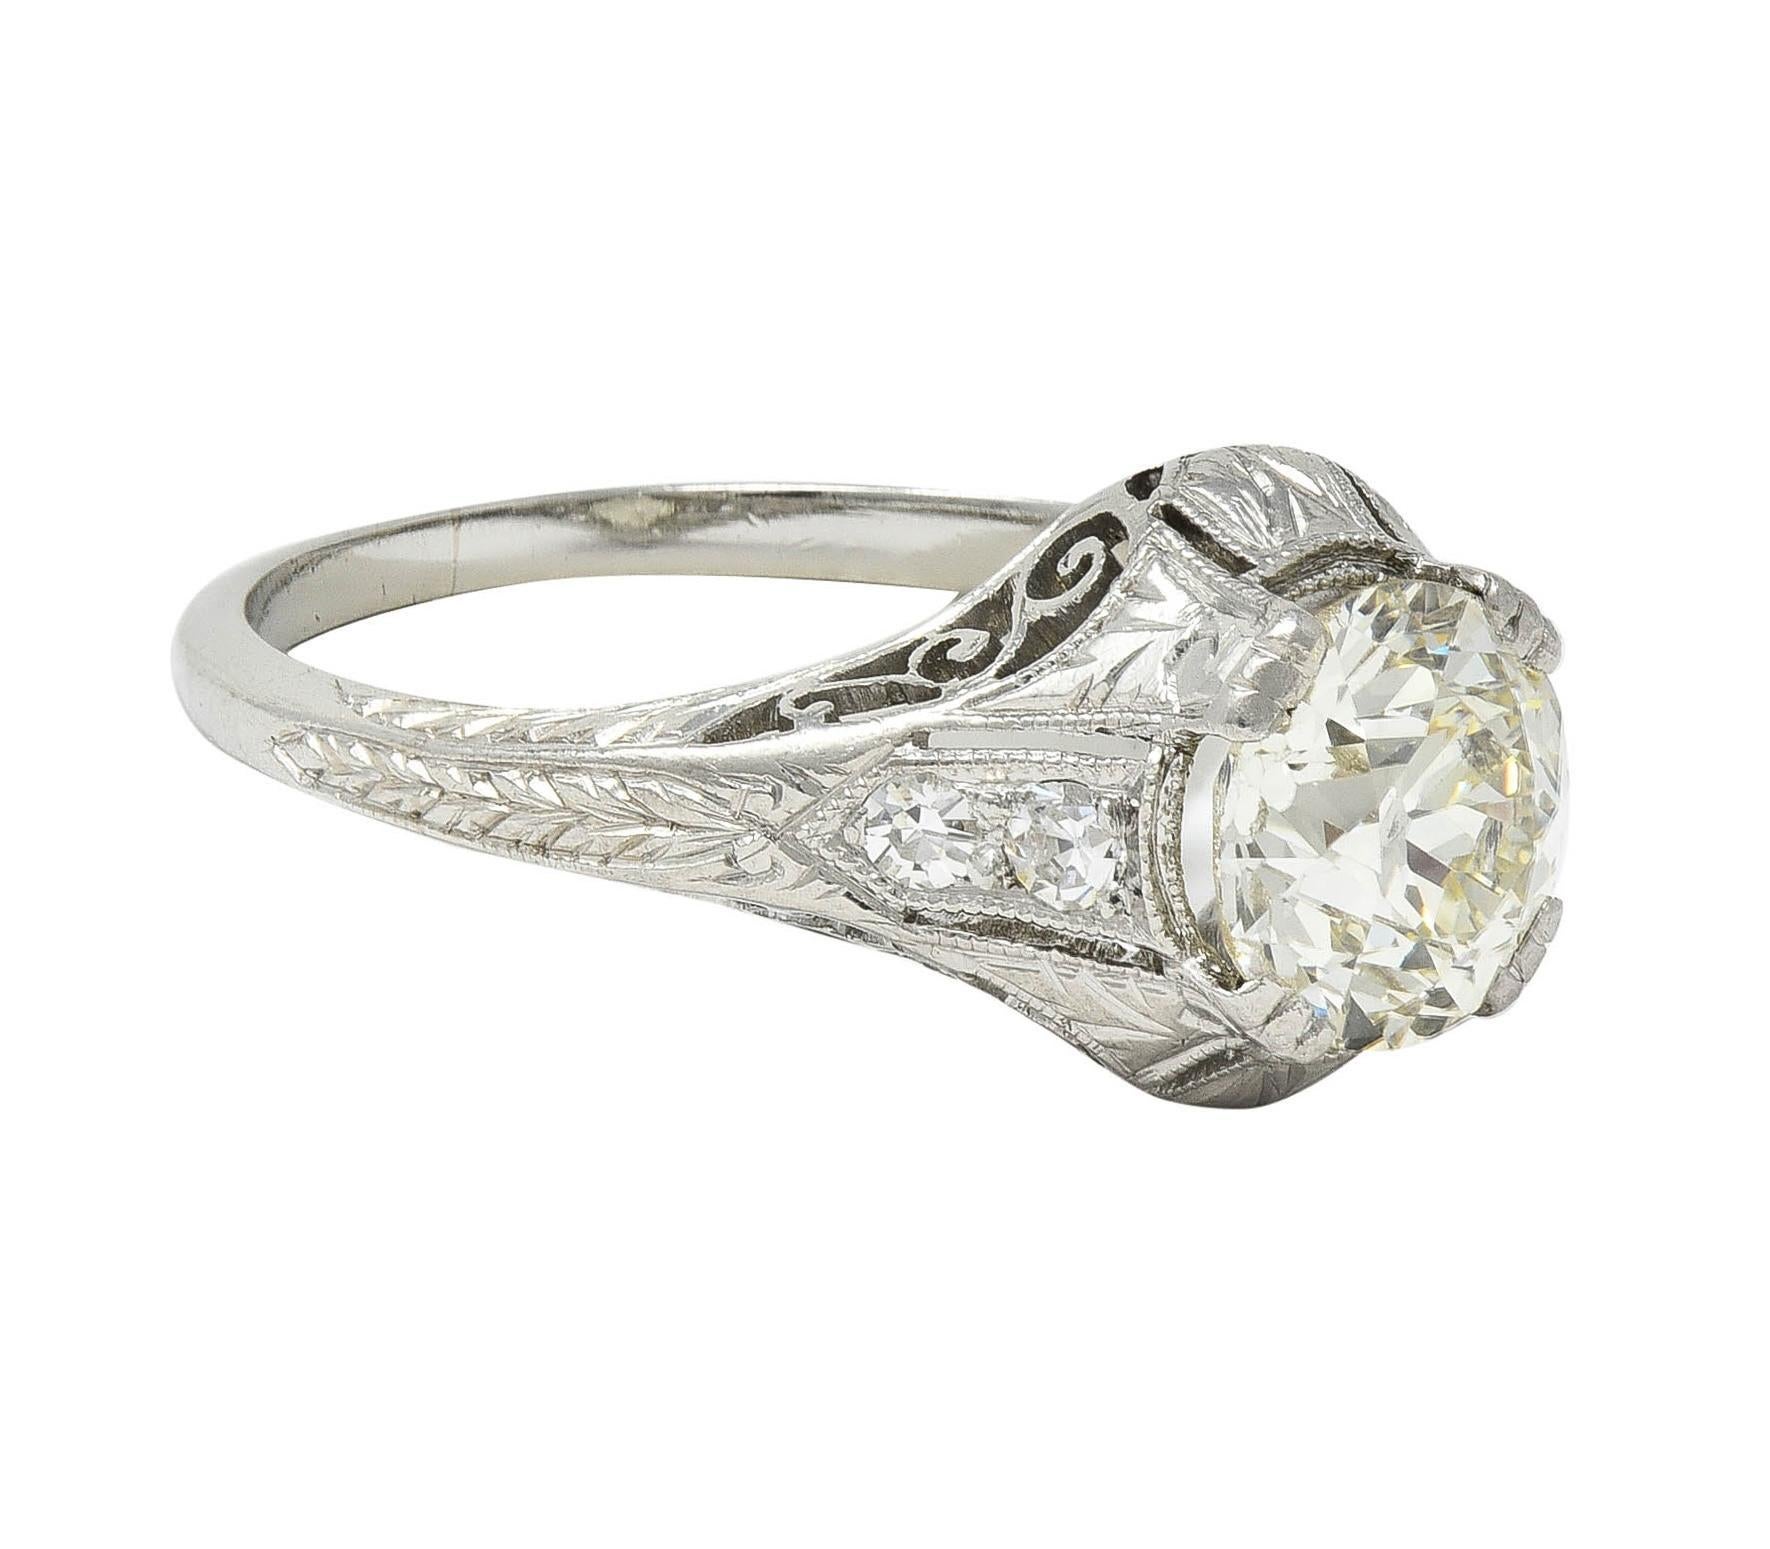 Centering an old European cut diamond weighing approximately 1.22 carats total - M color with VS2 clarity
Set with wide prongs and flanked by single cut diamonds bead set in shoulders
Weighing approximately 0.08 carat total - eye clean and